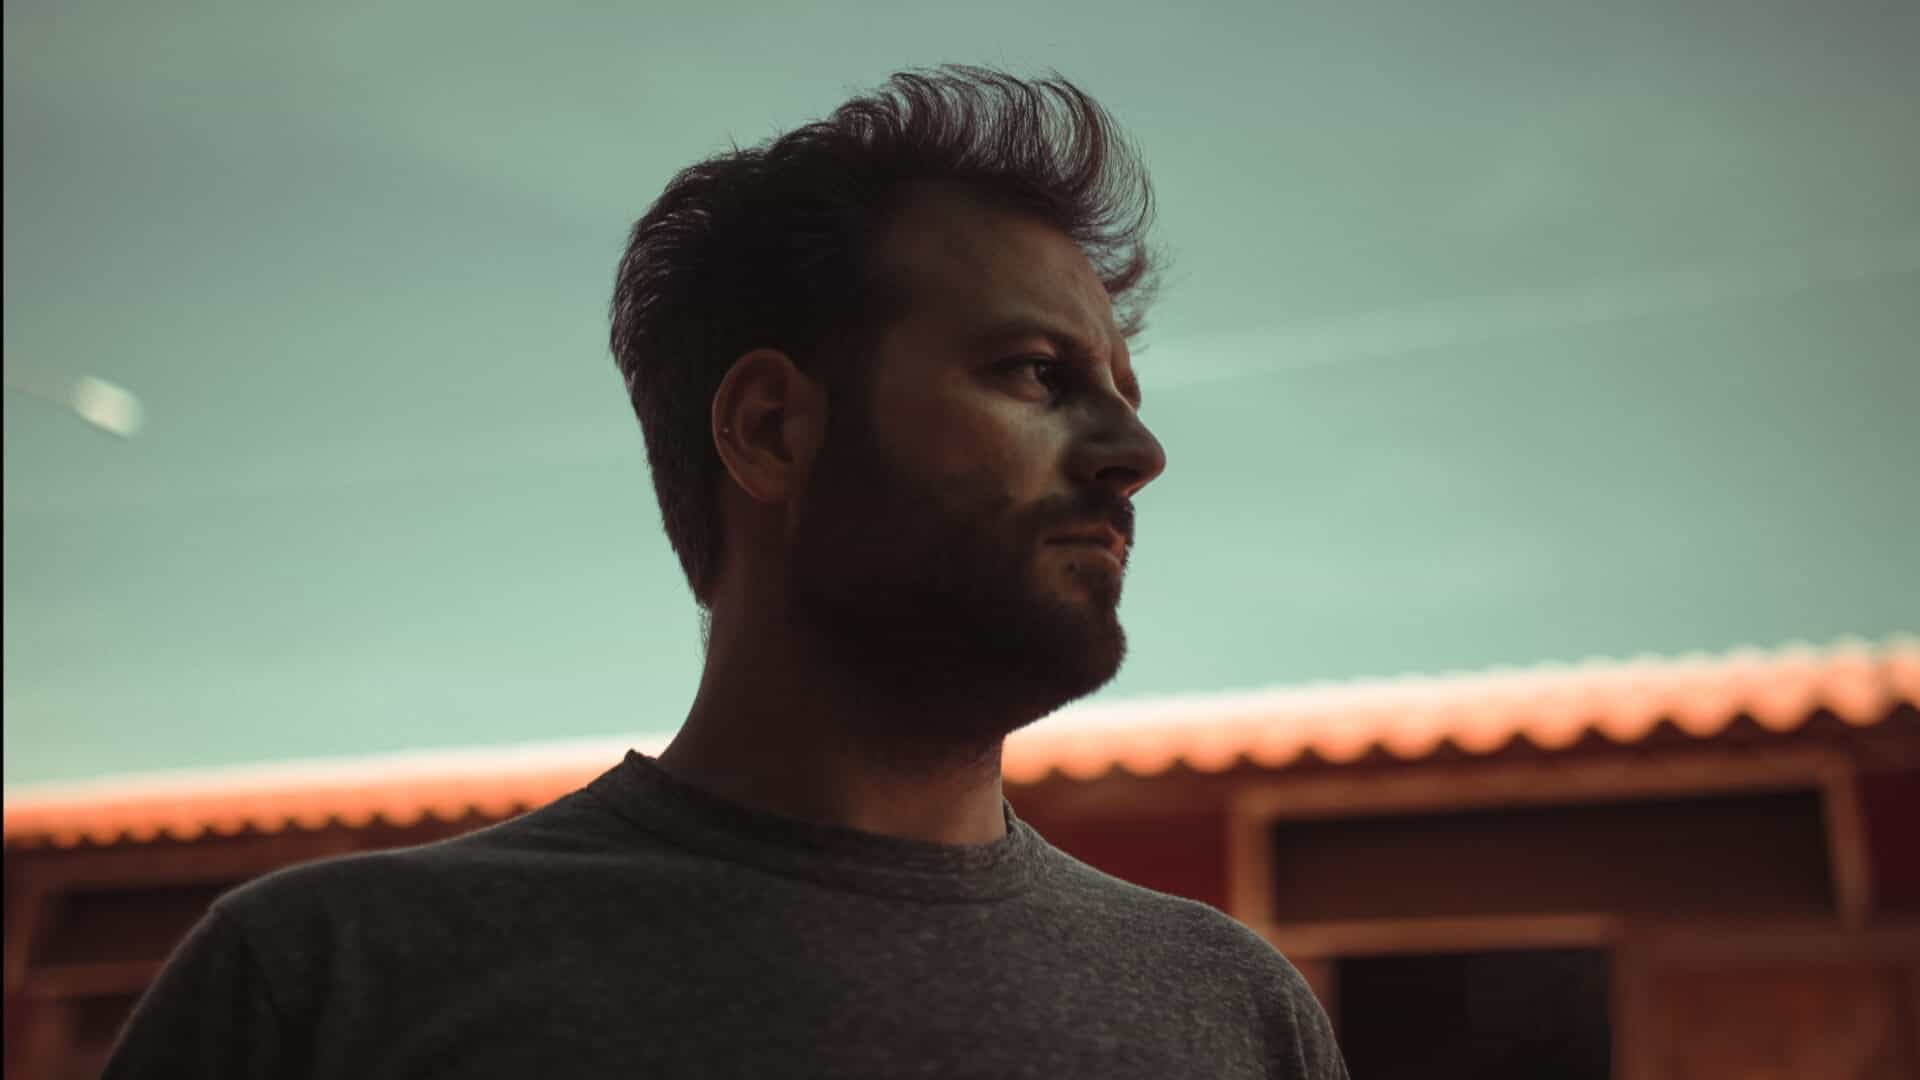 Enrico Sangiuliano is bringing his soundwaves to Ultra Miami 2023 [Live]